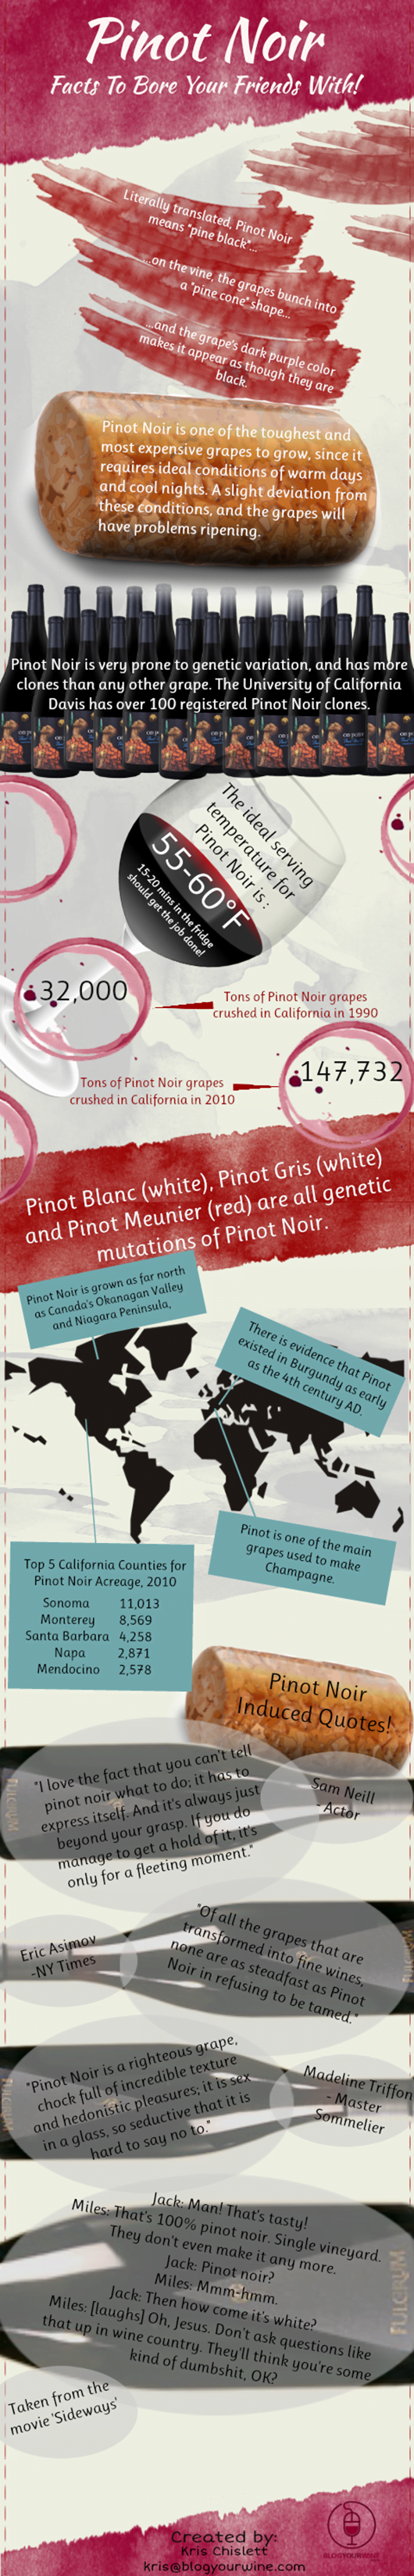 Pinot-Noir-Facts-Infographic